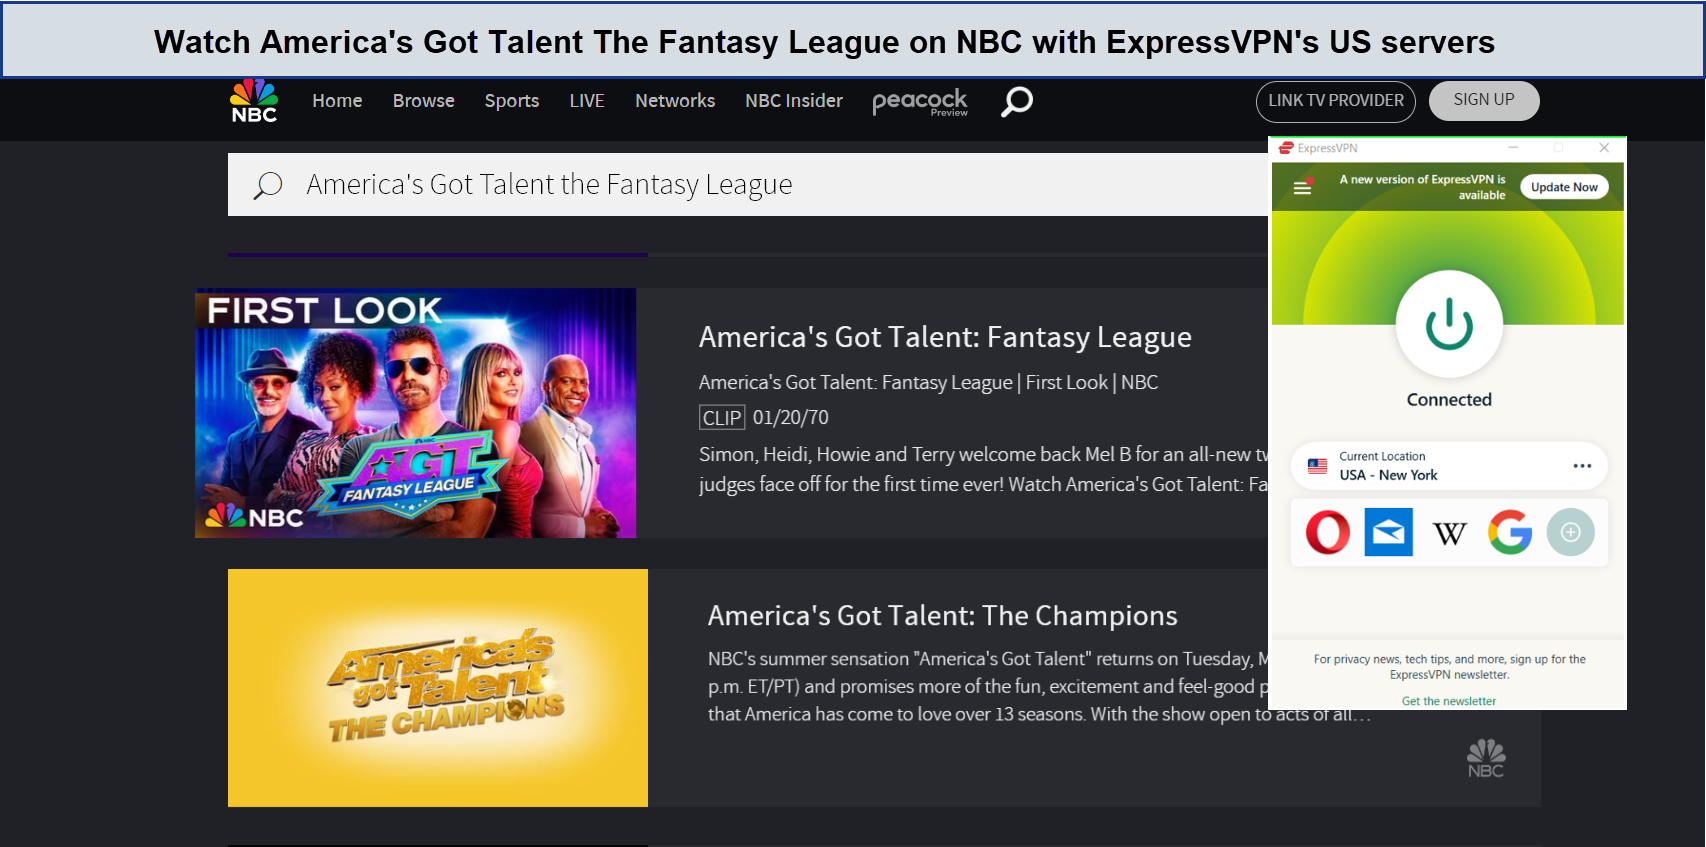 America-Got-Talent-The-Fantasy-League-on-NBC-with-ExpressVPN-in-Spain